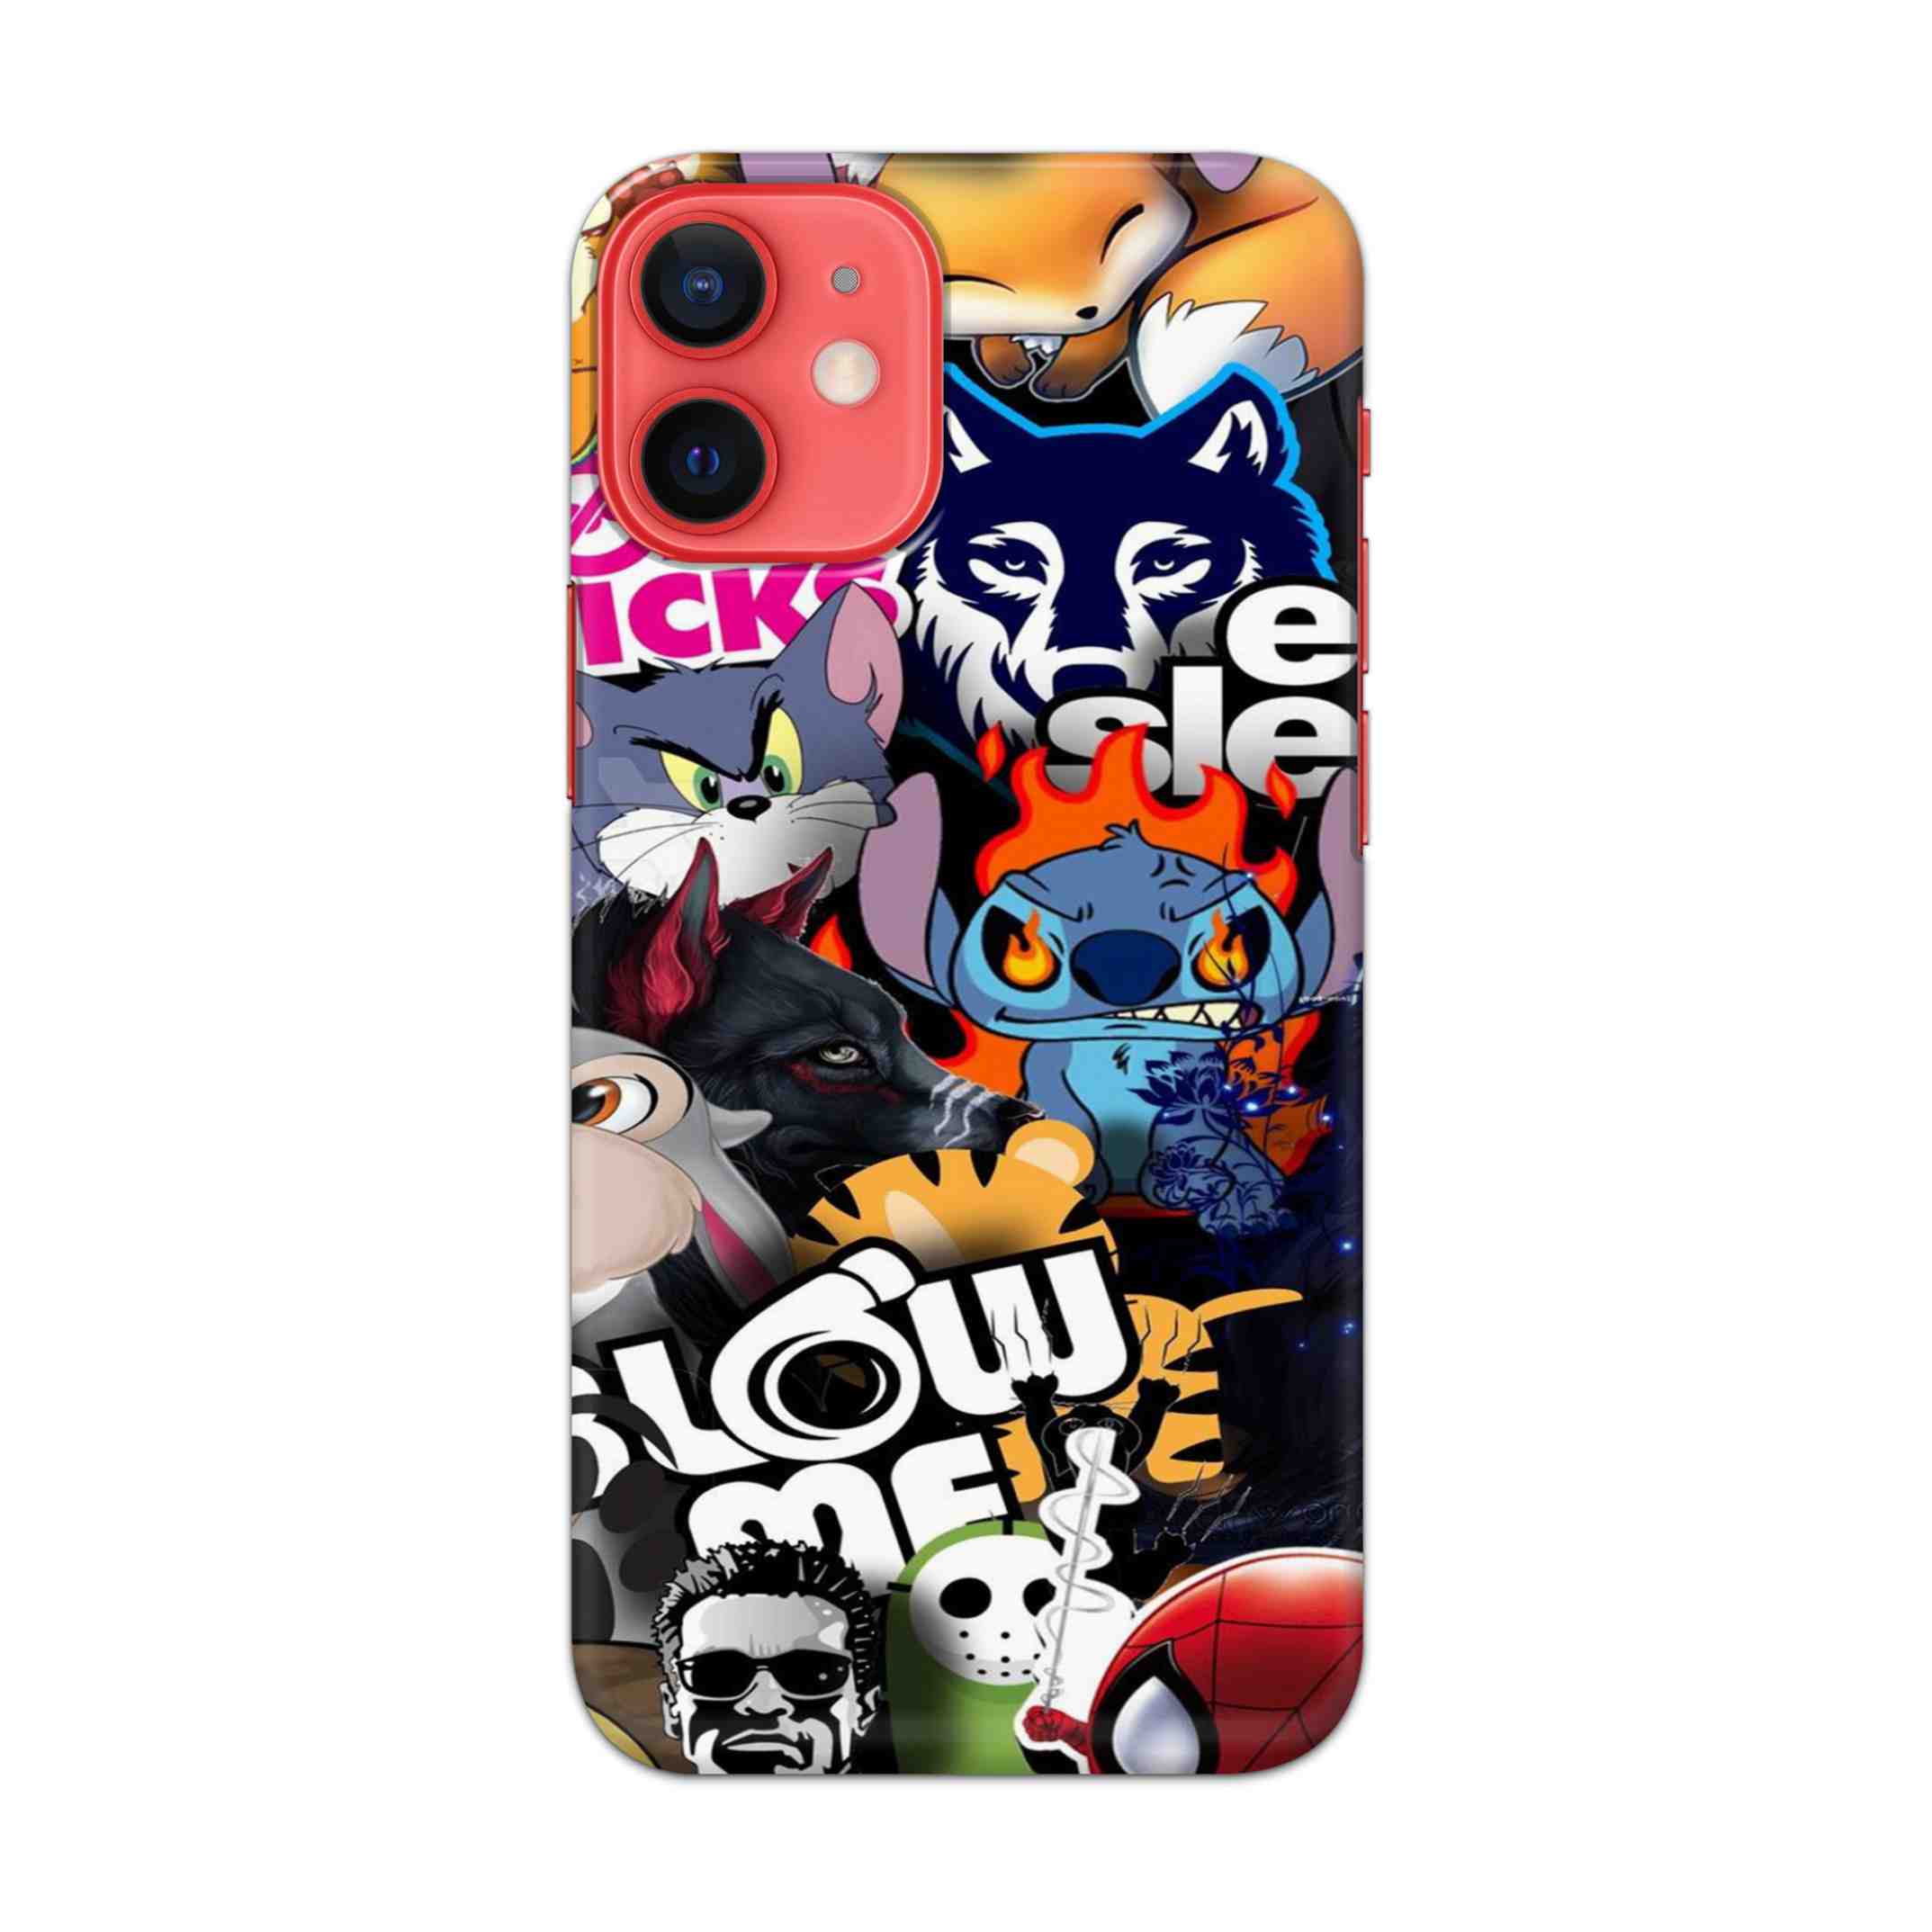 Buy Blow Me Hard Back Mobile Phone Case/Cover For Apple iPhone 12 mini Online